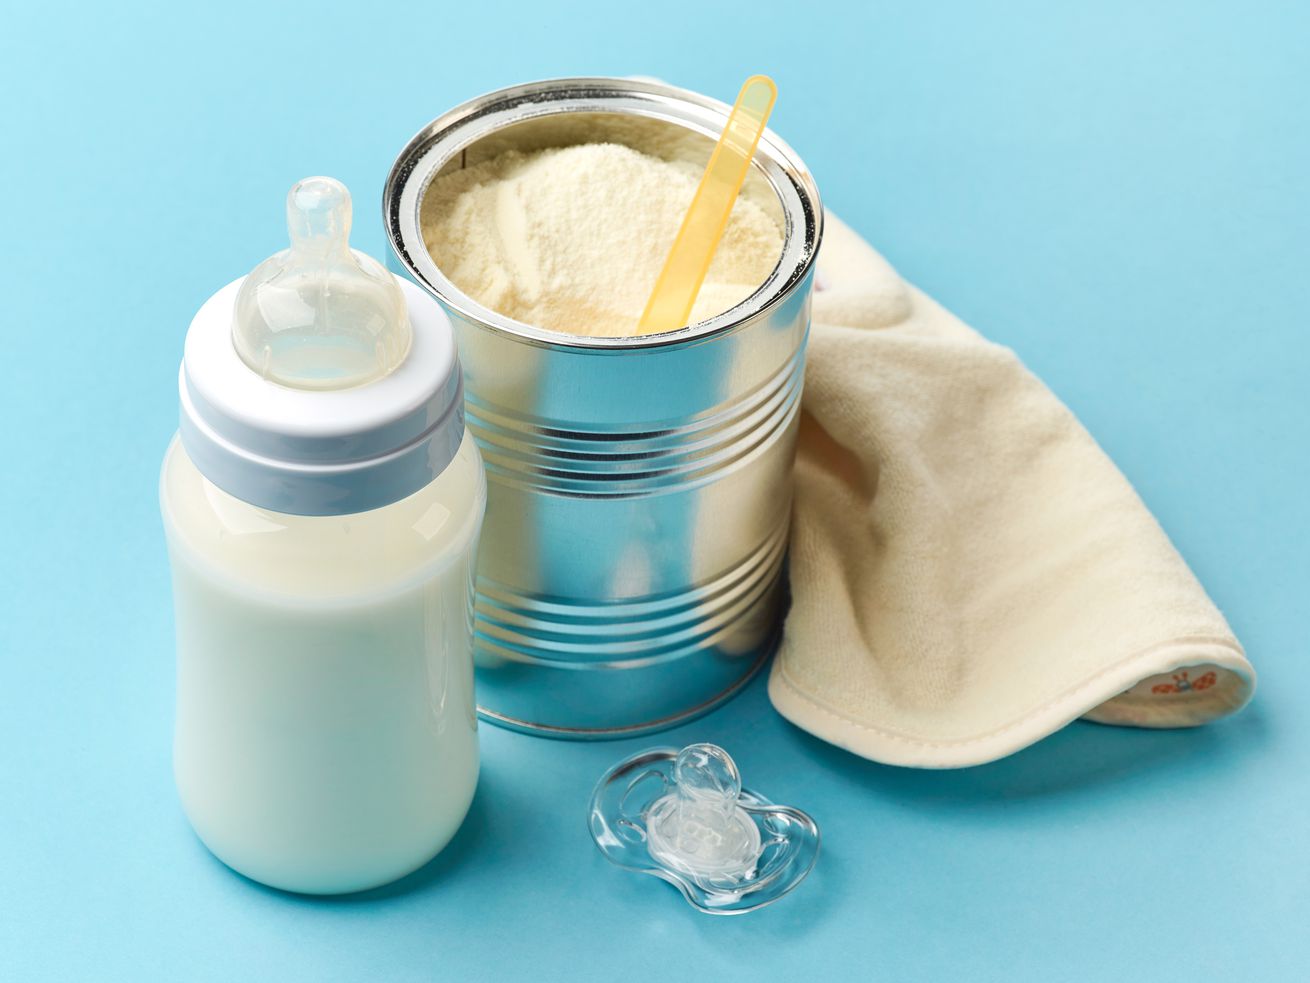 The Invention of Modern Baby Formula